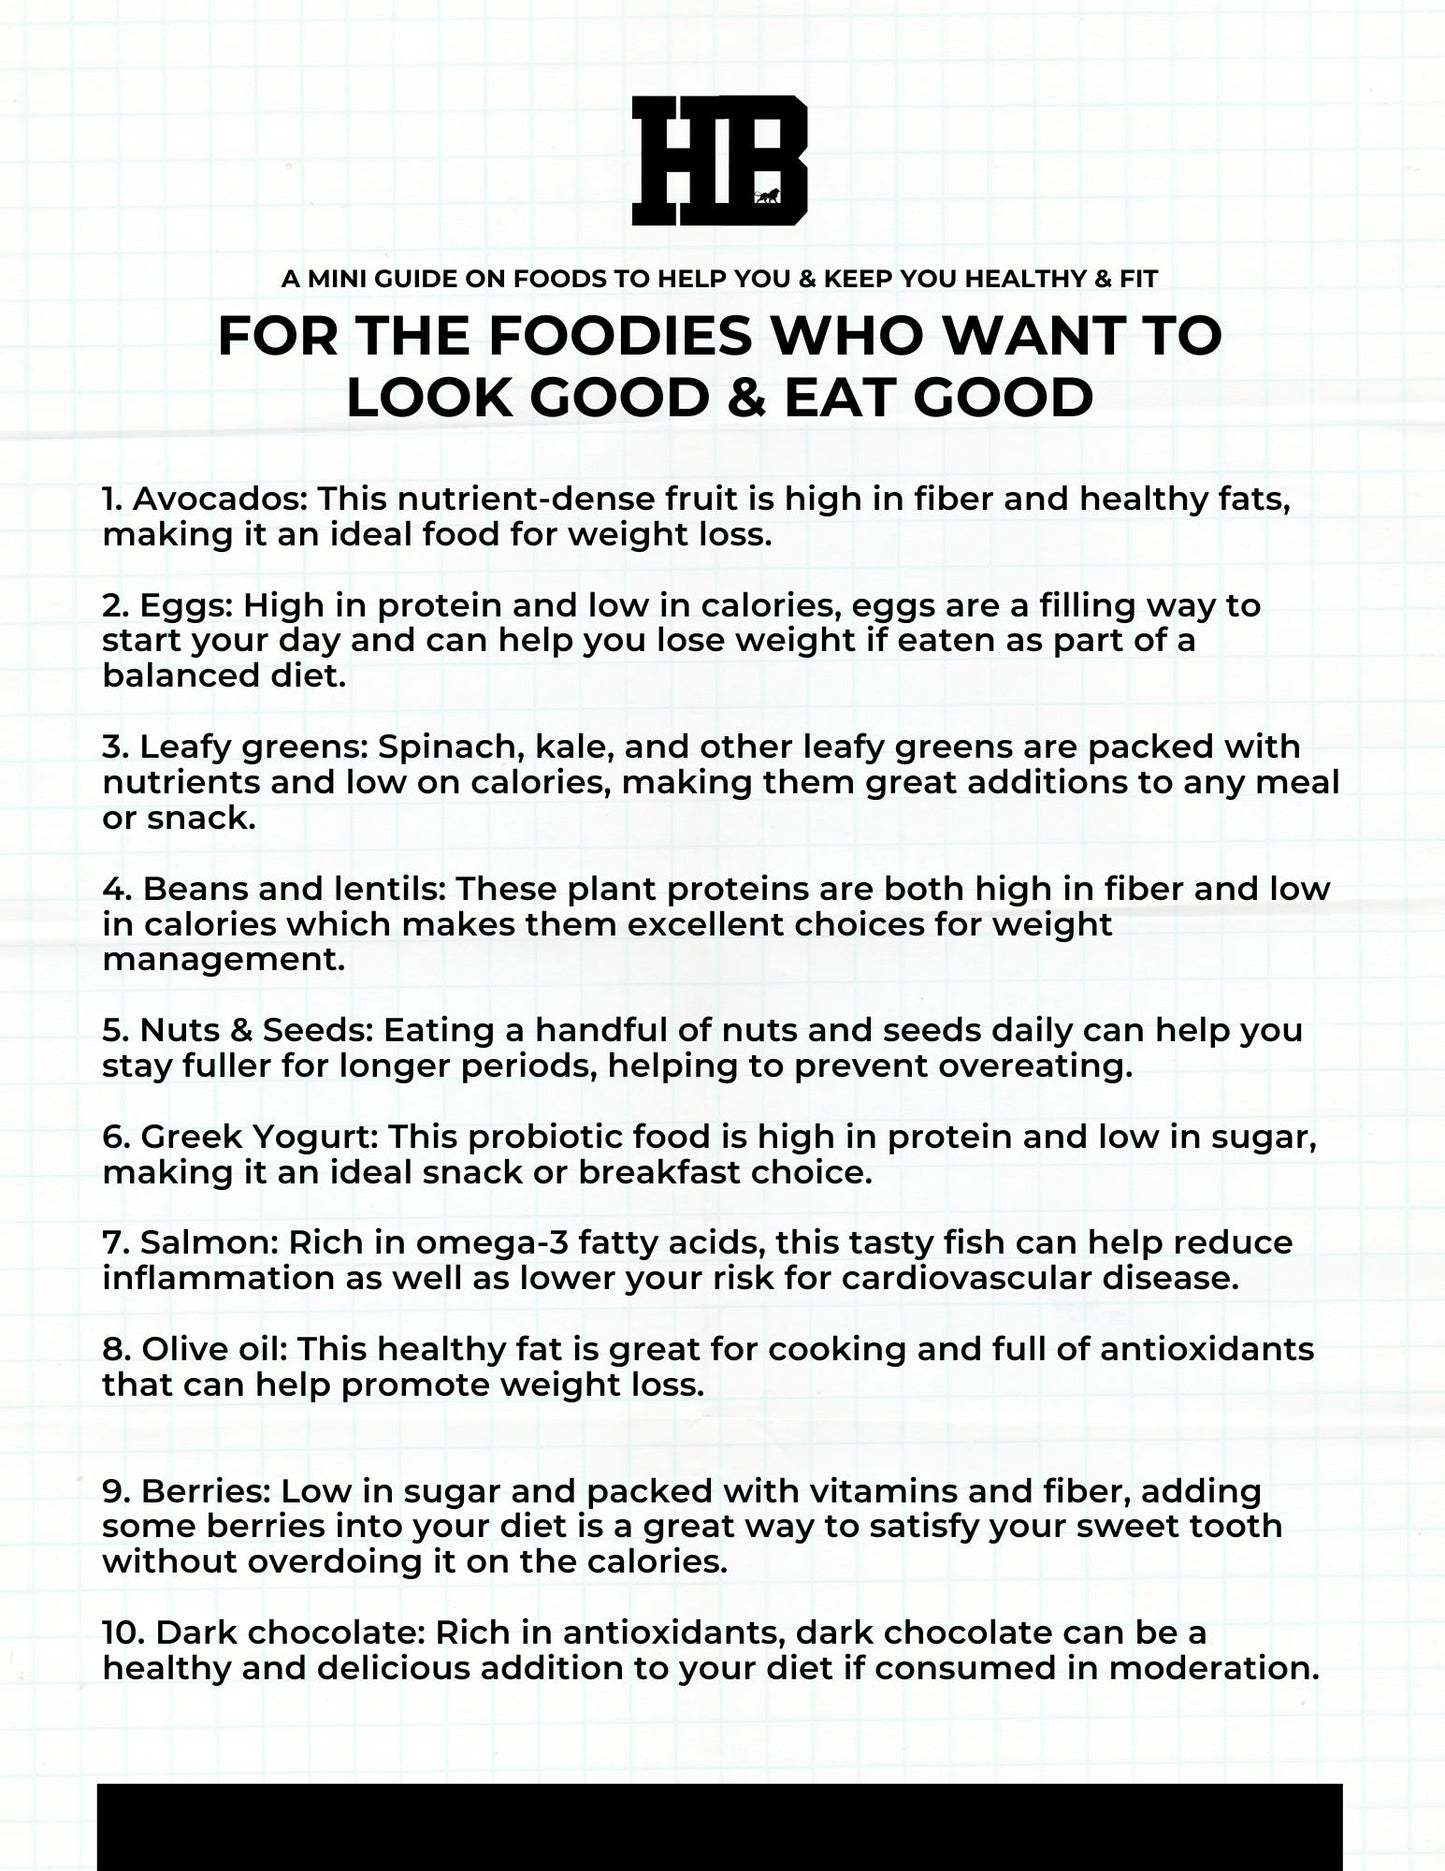 A MINI GUIDE ON FOODS TO HELP YOU & KEEP YOU HEALTHY & FIT